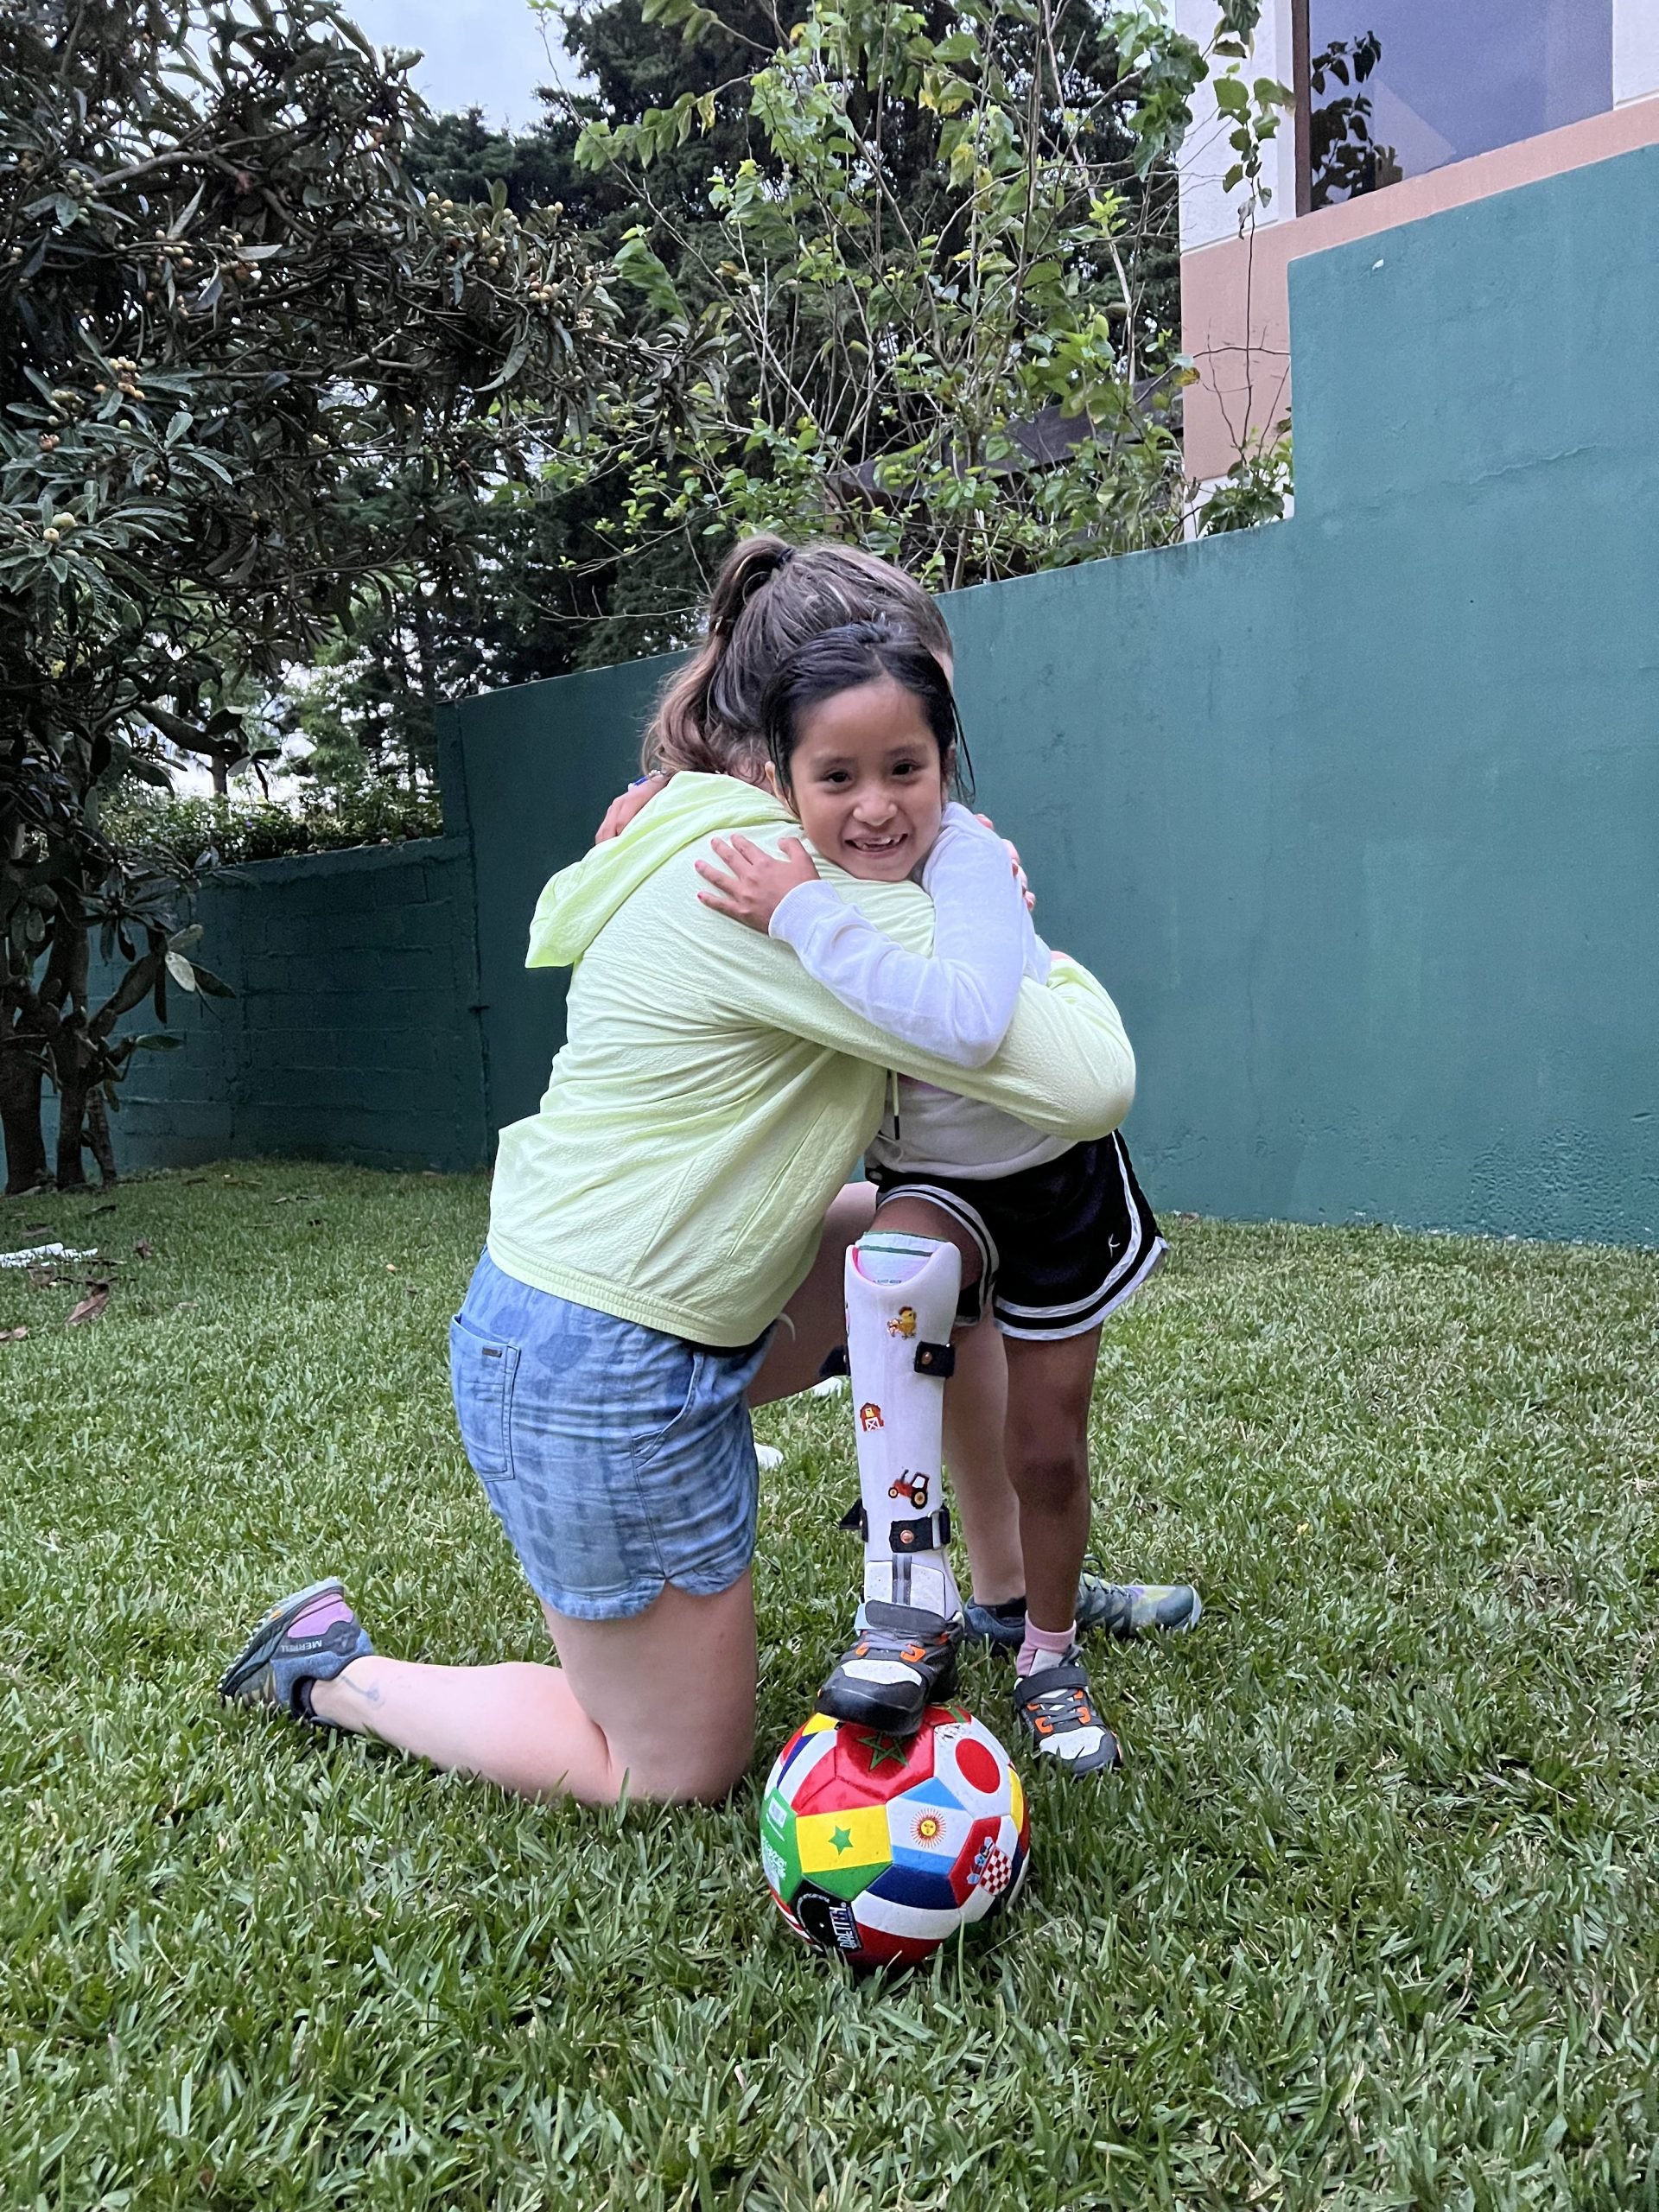 A woman hugging a young girl wearing a prosthetic leg standing with her foot on a soccer ball.